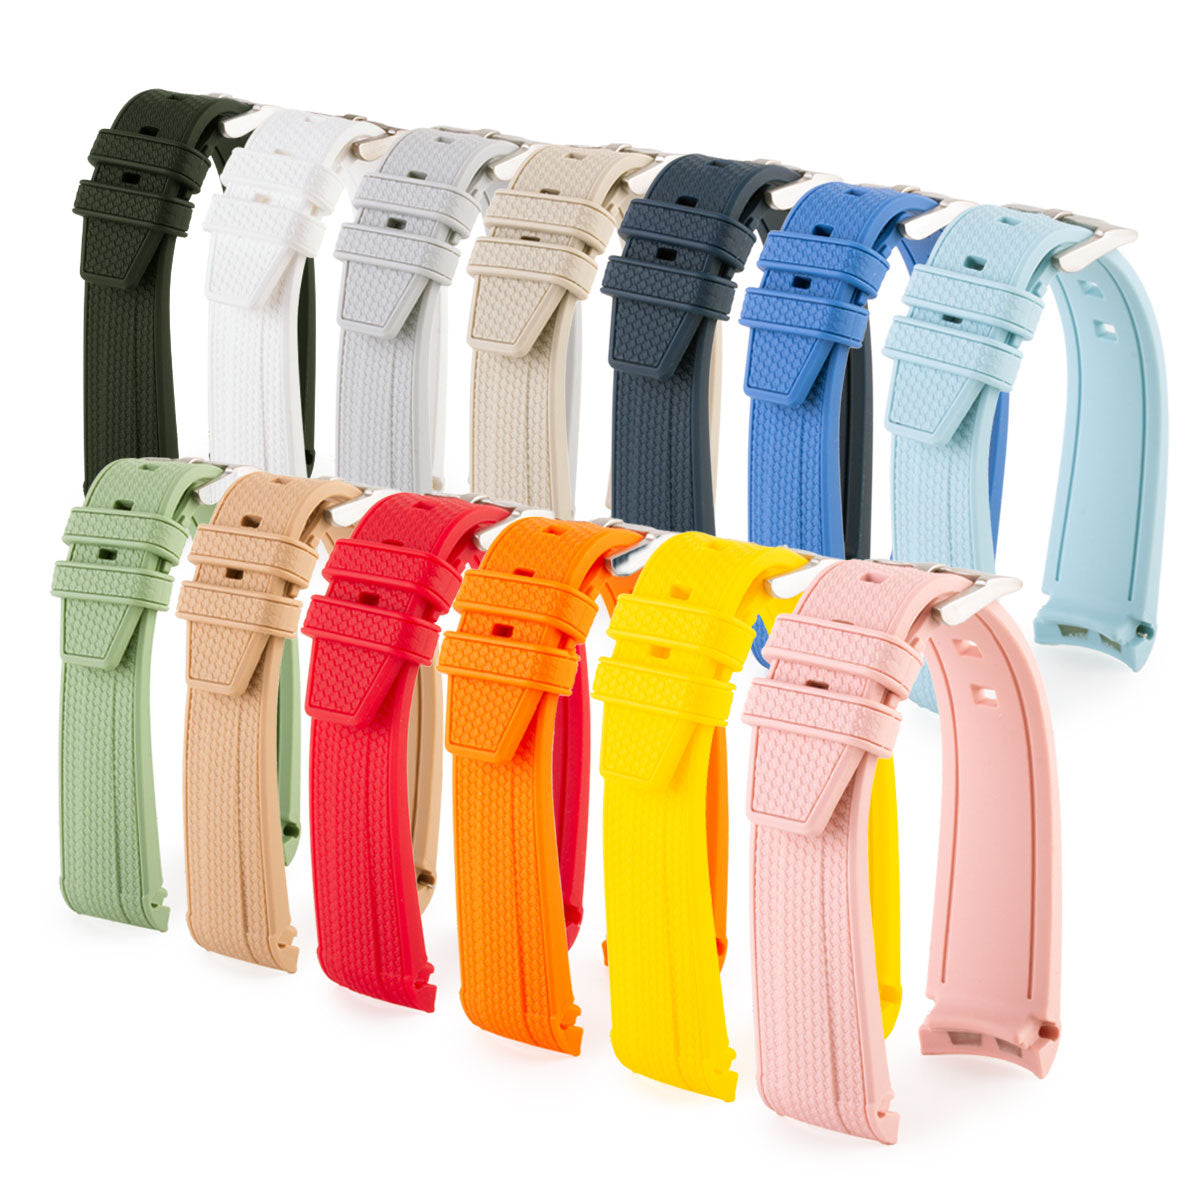 MoonSwatch Omega x Swatch - Integrated rubber watch strap - Plain color rubber (blue, green, red...)